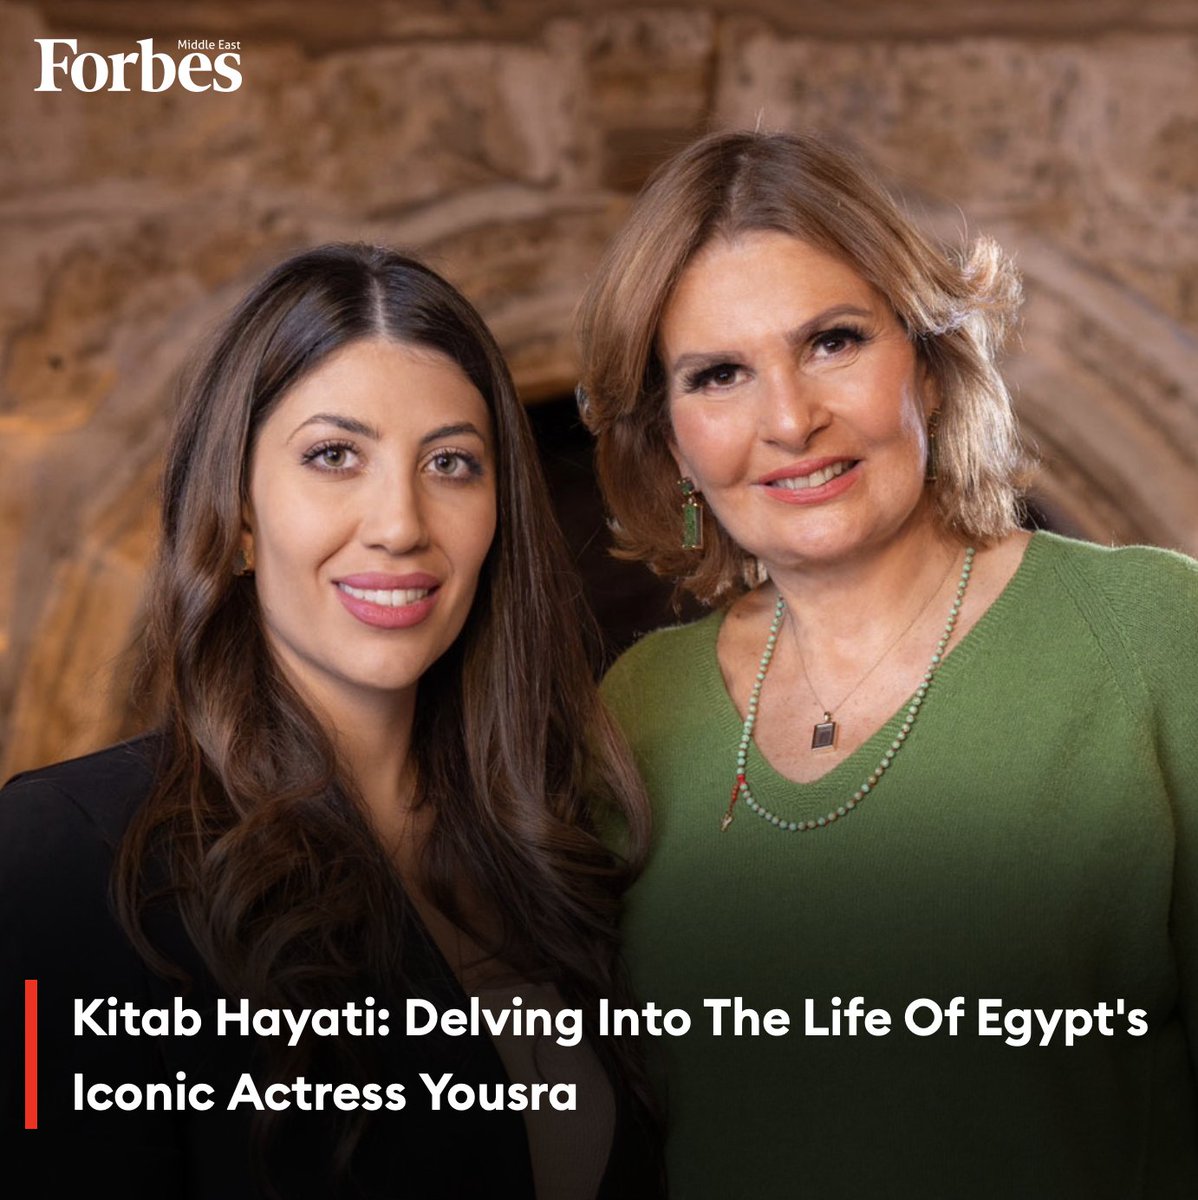 On the second episode of our talk show Kitab Hayati, Egyptian actress and singer Yousra opens up about her rise to stardom and the challenges she faced along the way.

#Forbes @nancybahmad @Youssra

For more details: 🔗 on.forbesmiddleeast.com/a79g